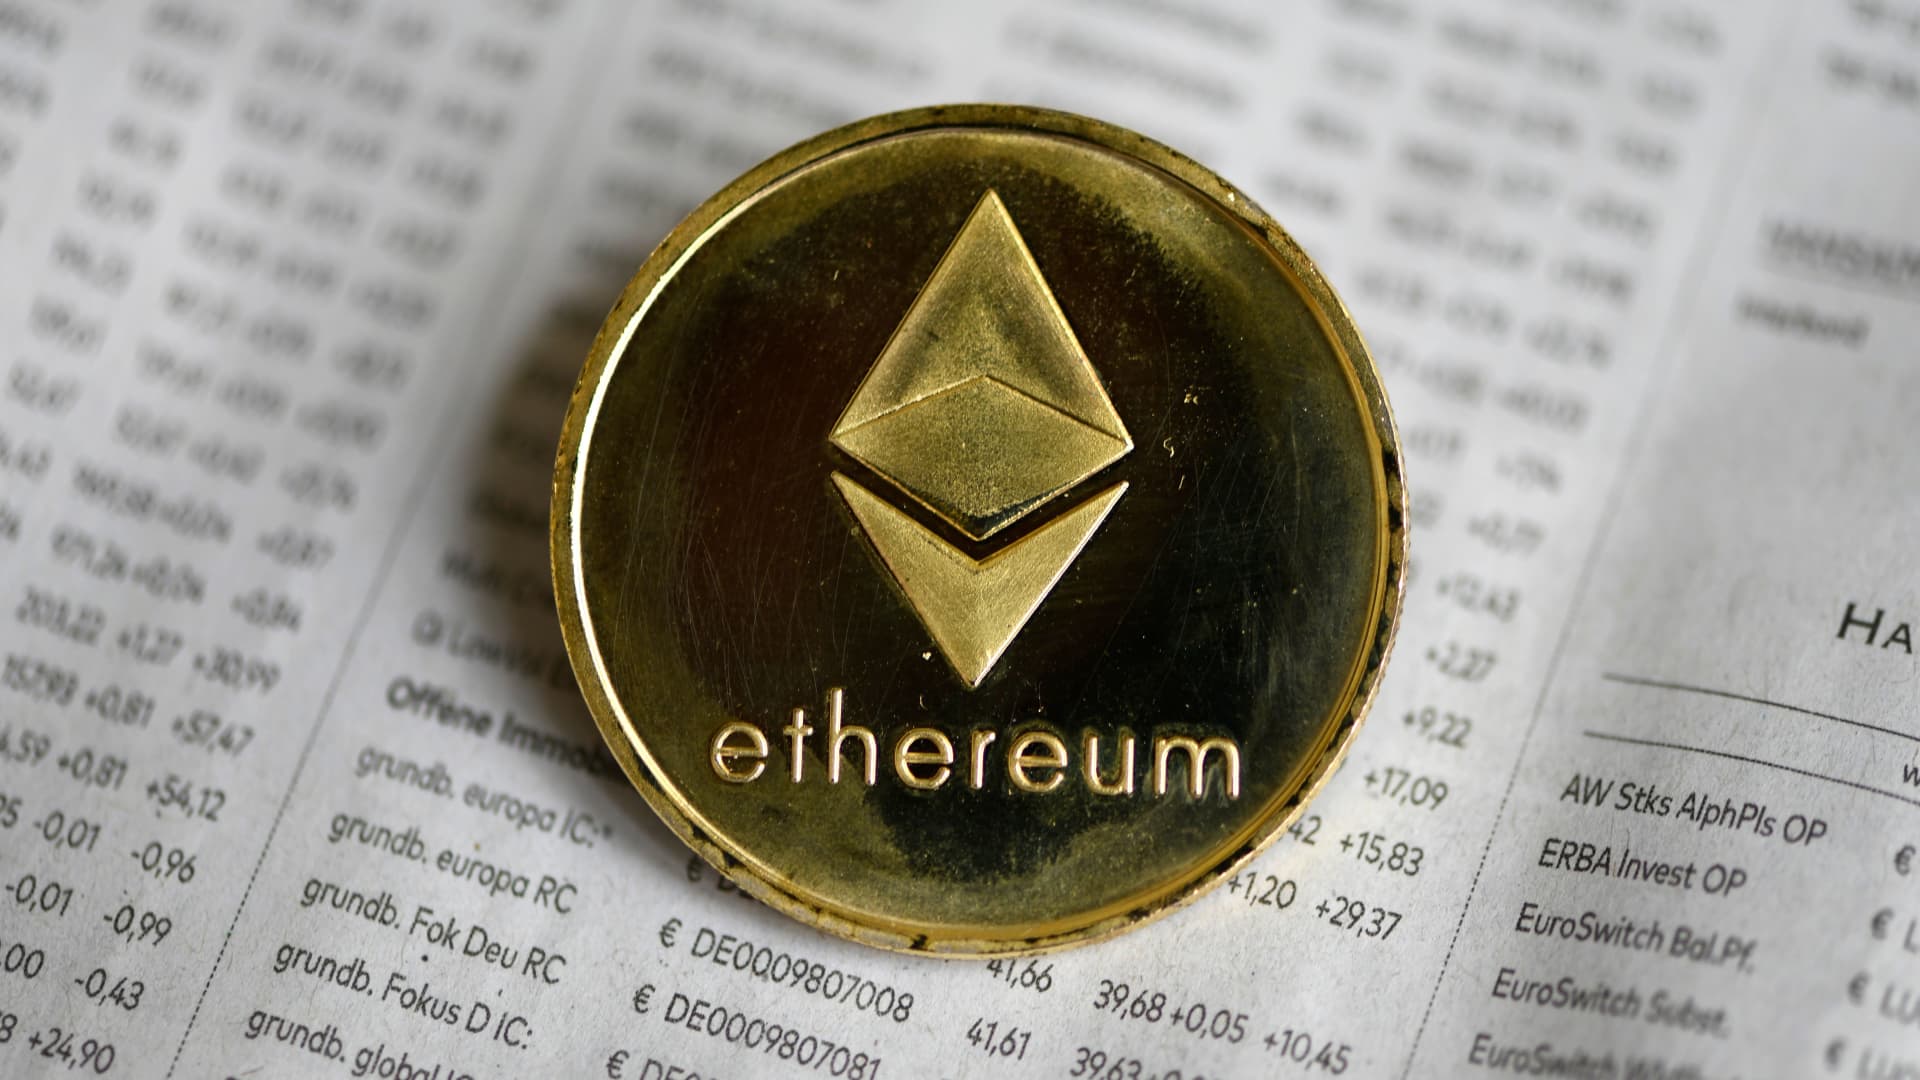 Ethereum had a successful dress rehearsal to move to proof-of-stake